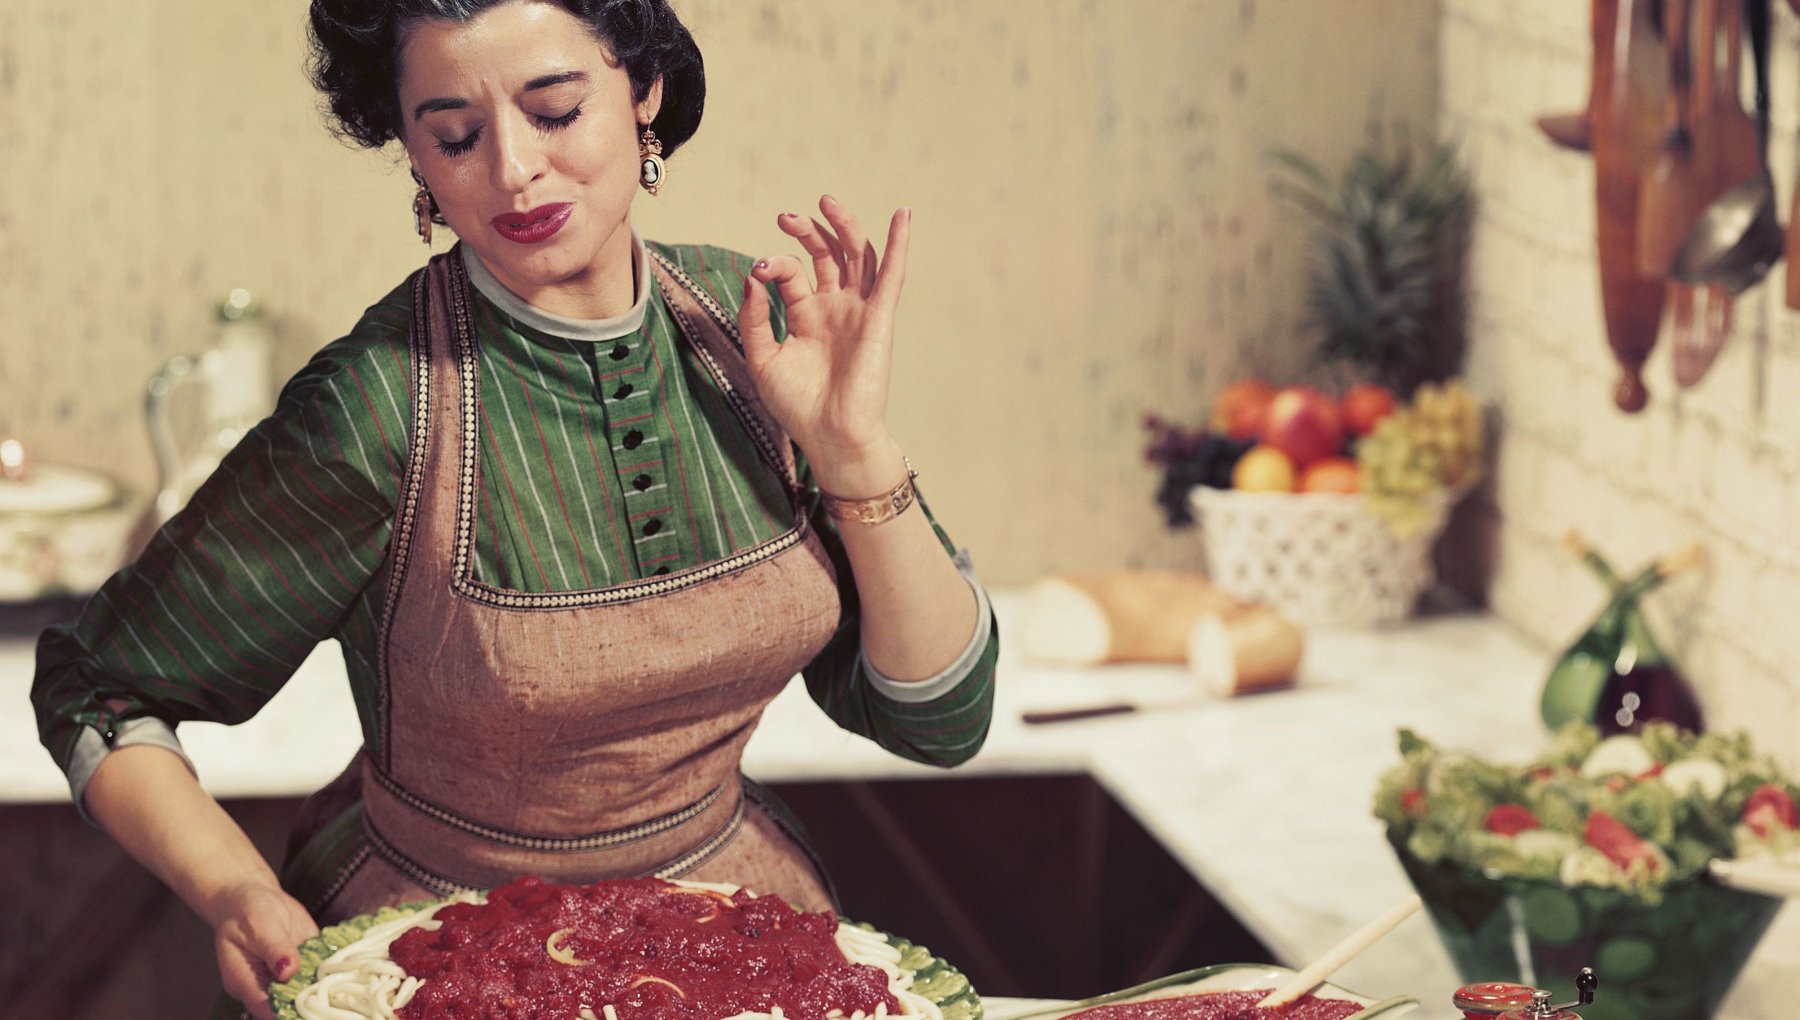 The Ladies of Recipes: the three women who taught Italians how to cook